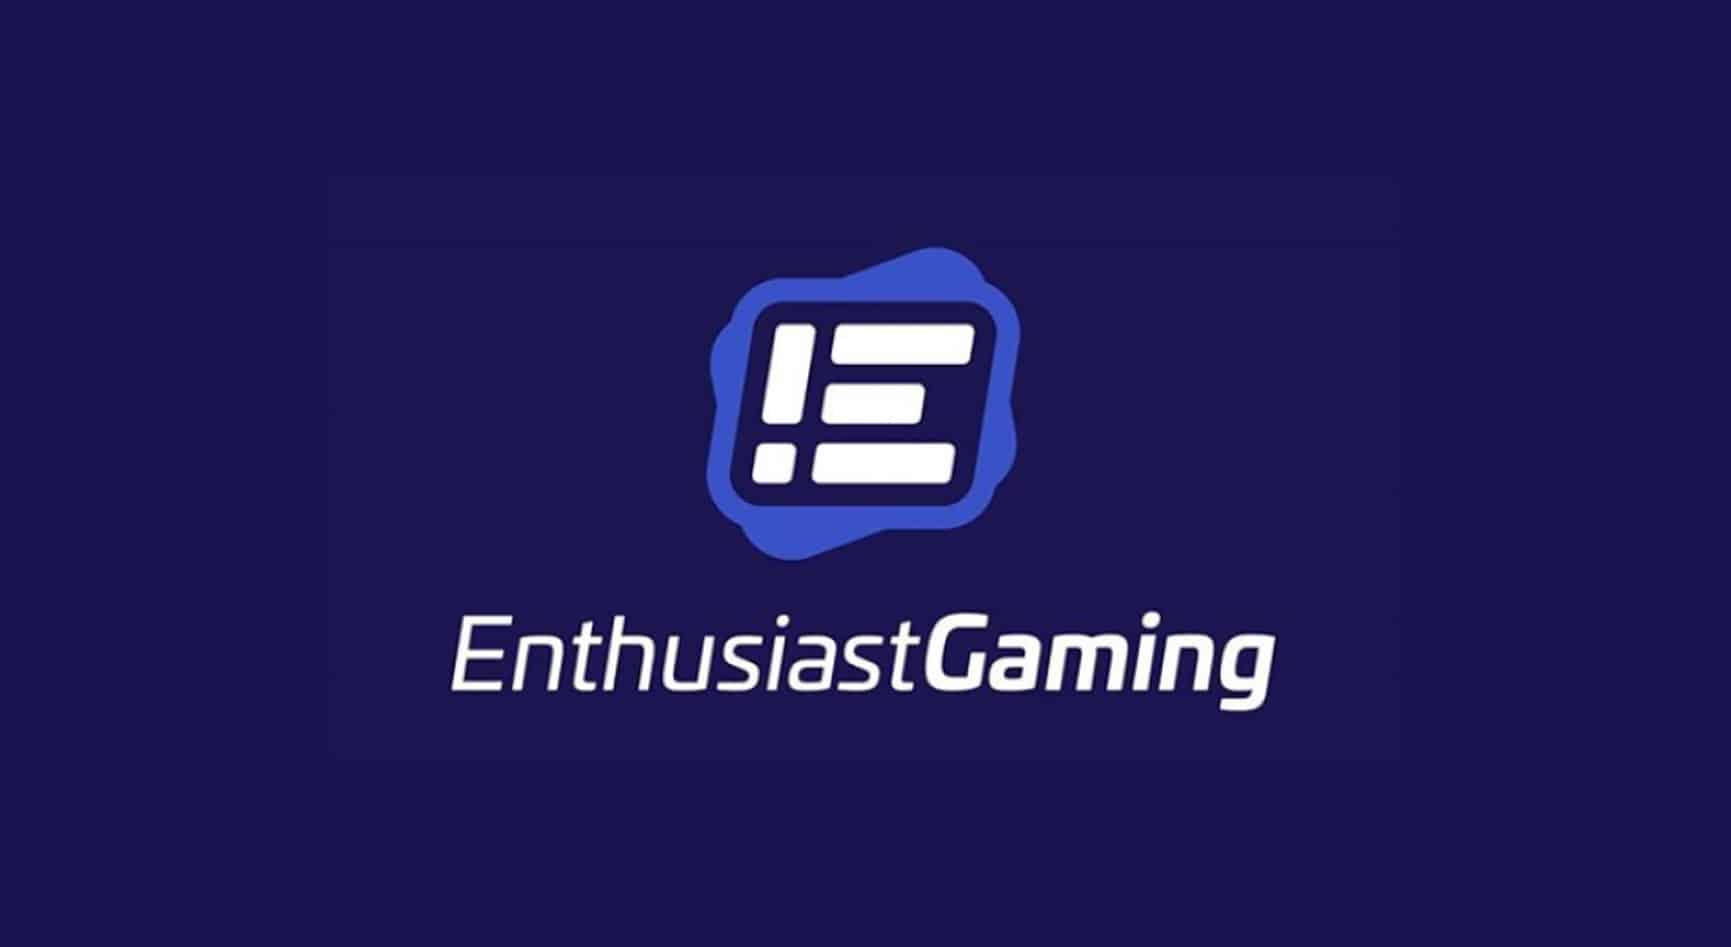 Image for Enthusiast Gaming shareholder calls for change of leadership